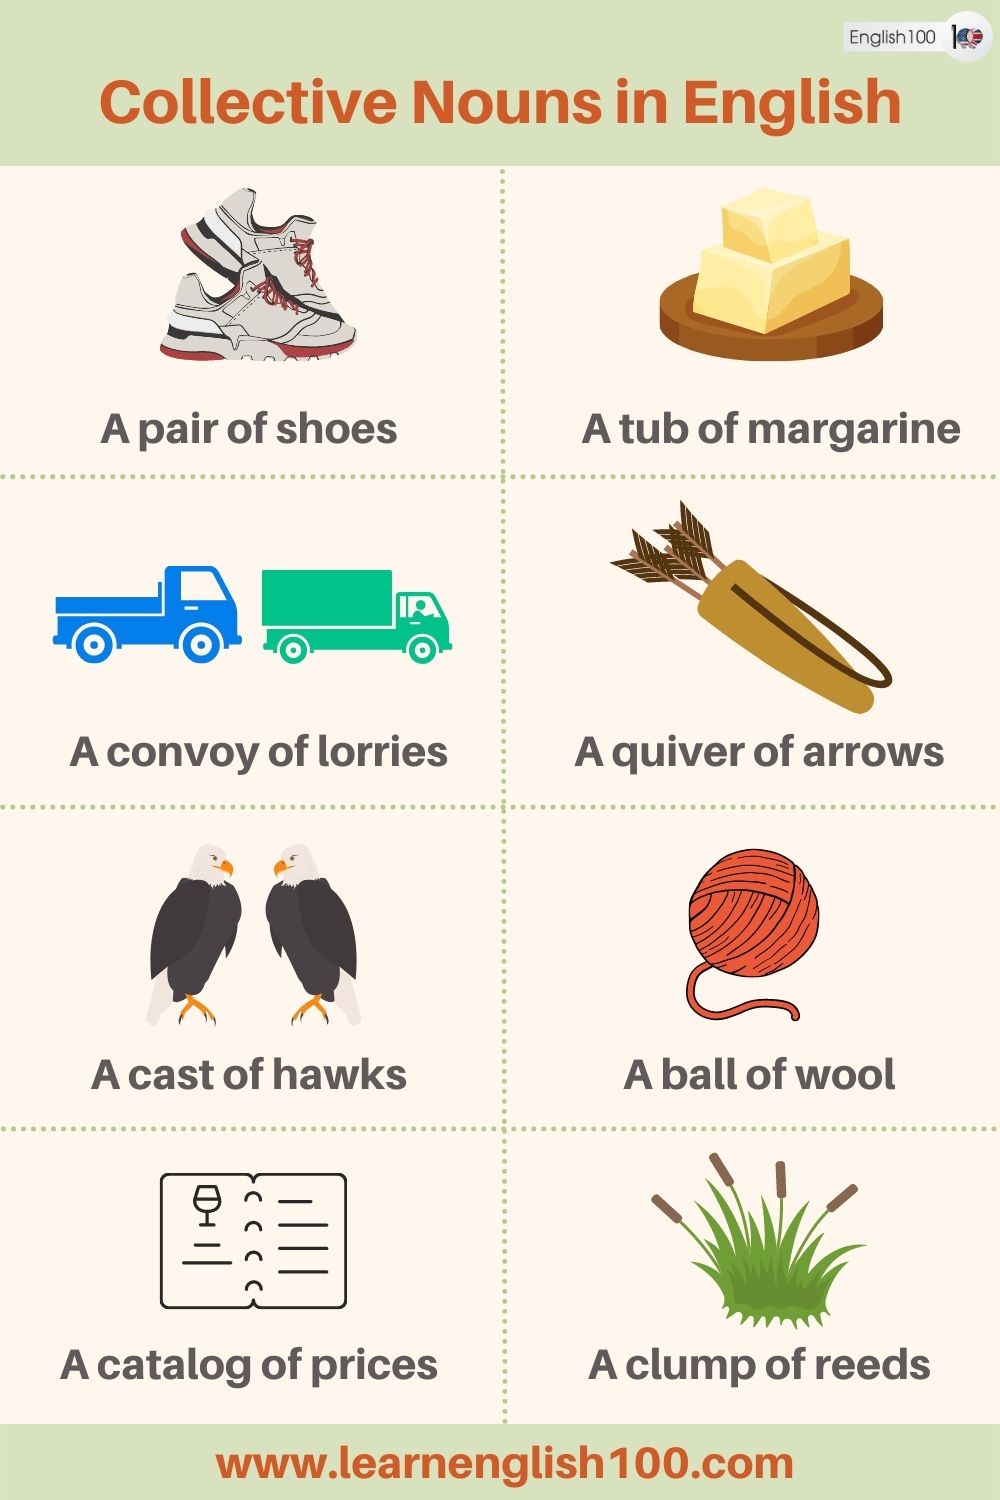 Collective Nouns in English